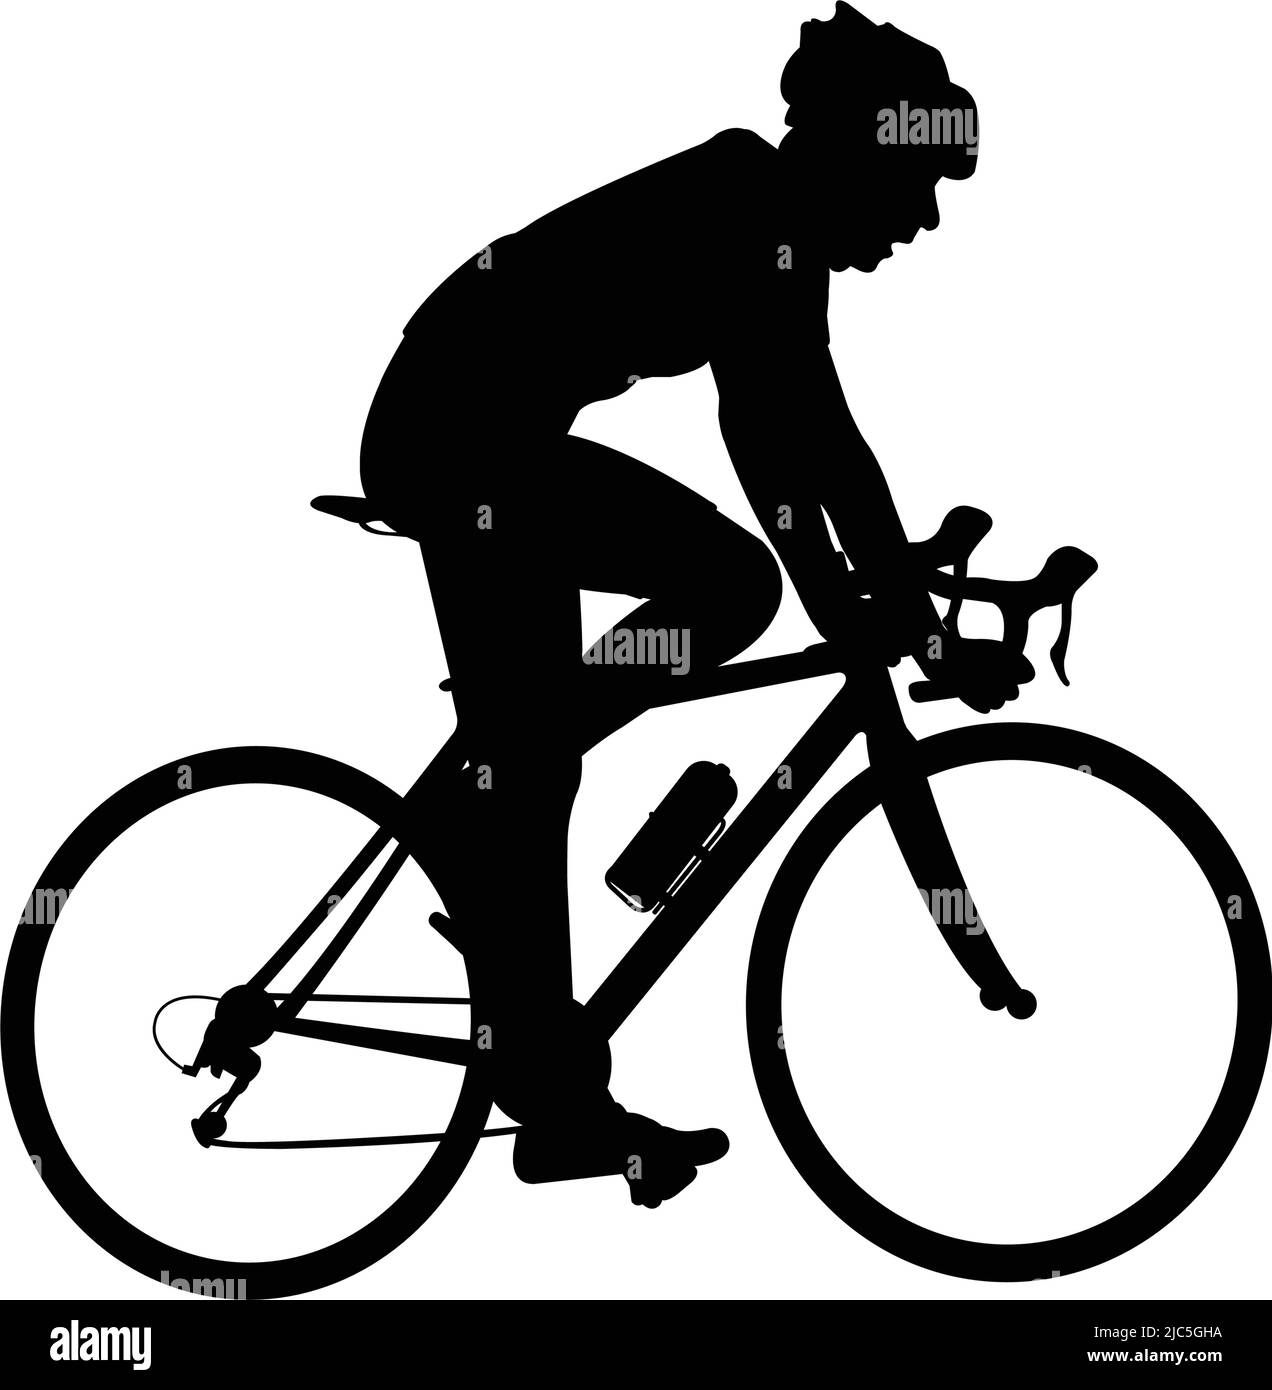 high quality race bicyclist silhouette - vector Stock Vector